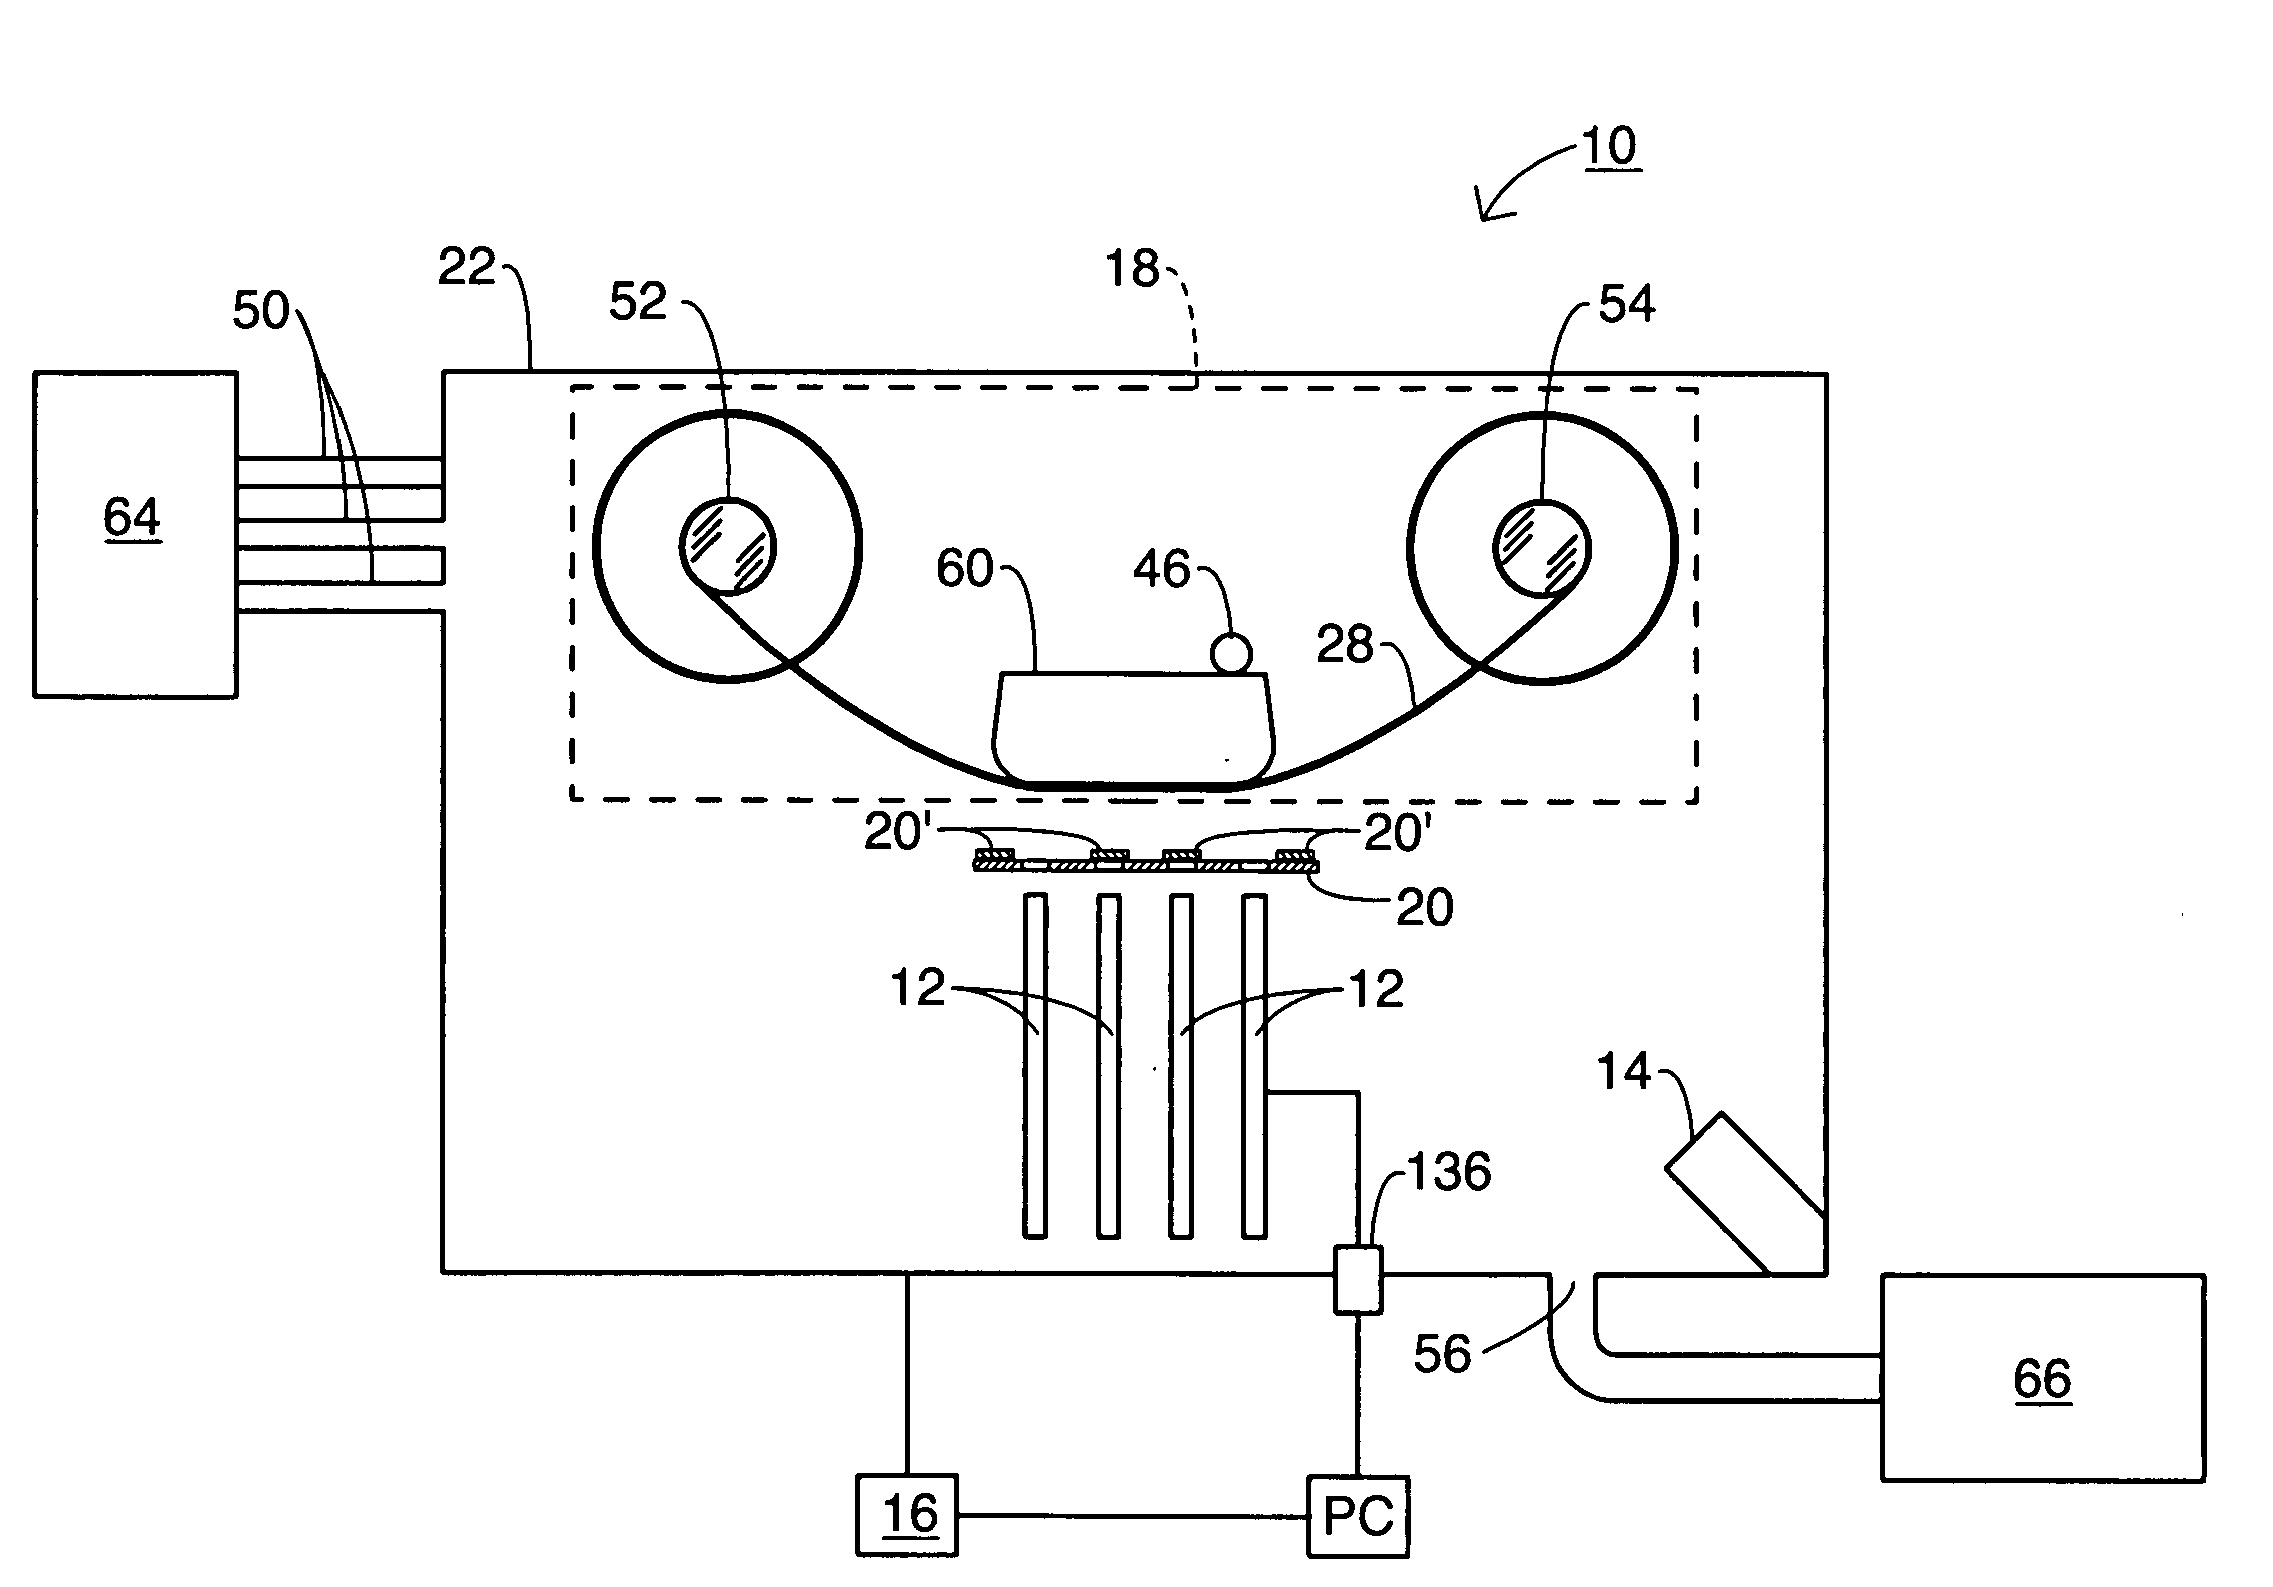 Tape-manufacturing system having extended operational capabilites